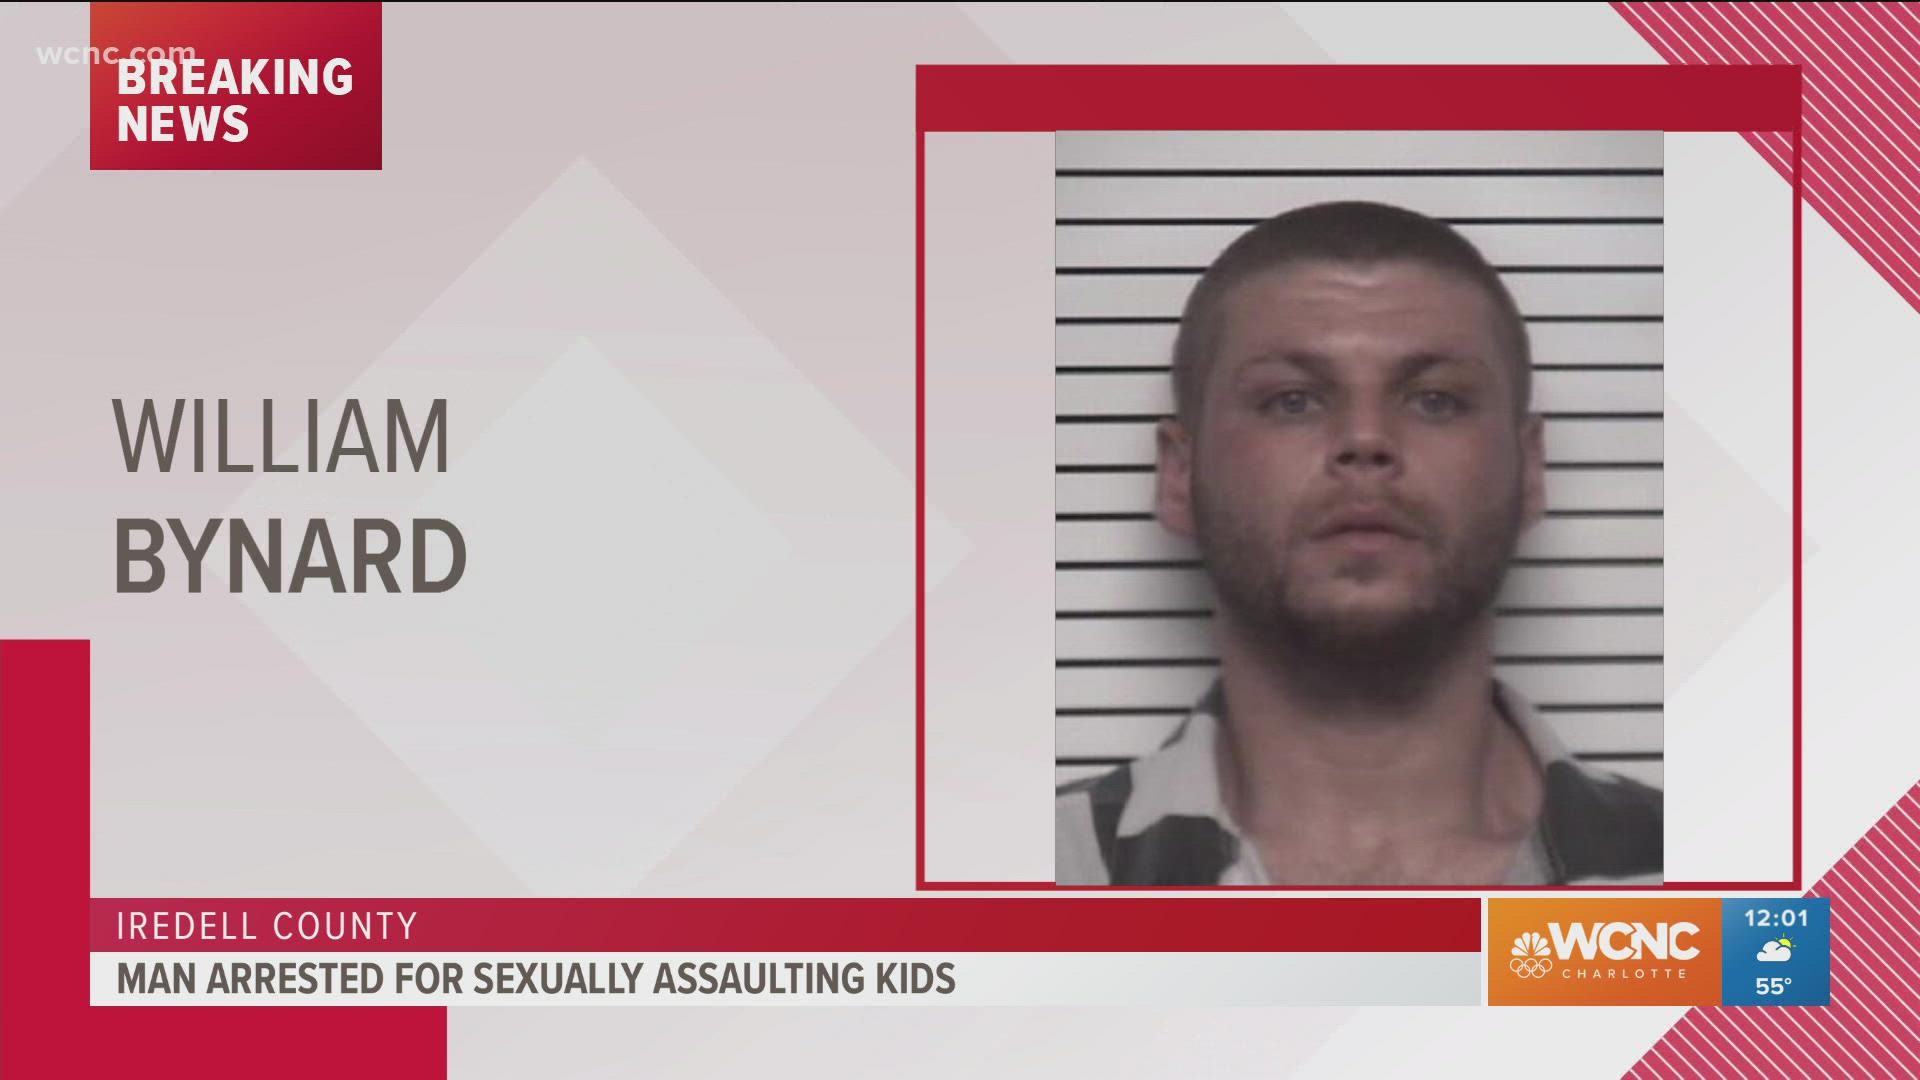 An Iredell County man is facing multiple charges after investigators said he kidnapped and assaulted multiple children.